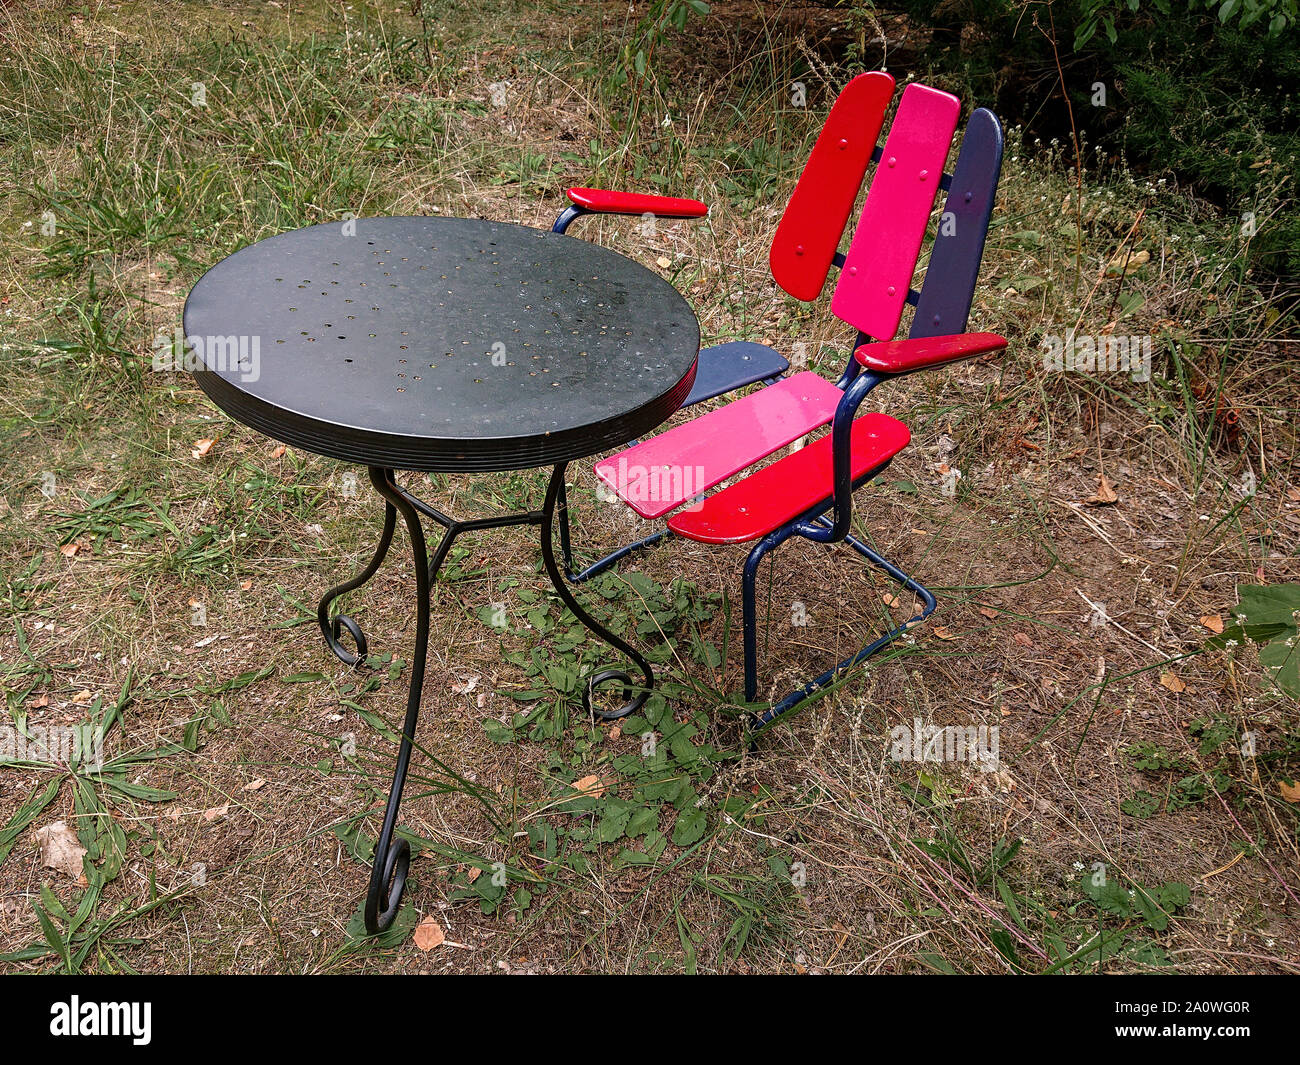 Colourful outdoor set of a red and purple painted old fashioned chair